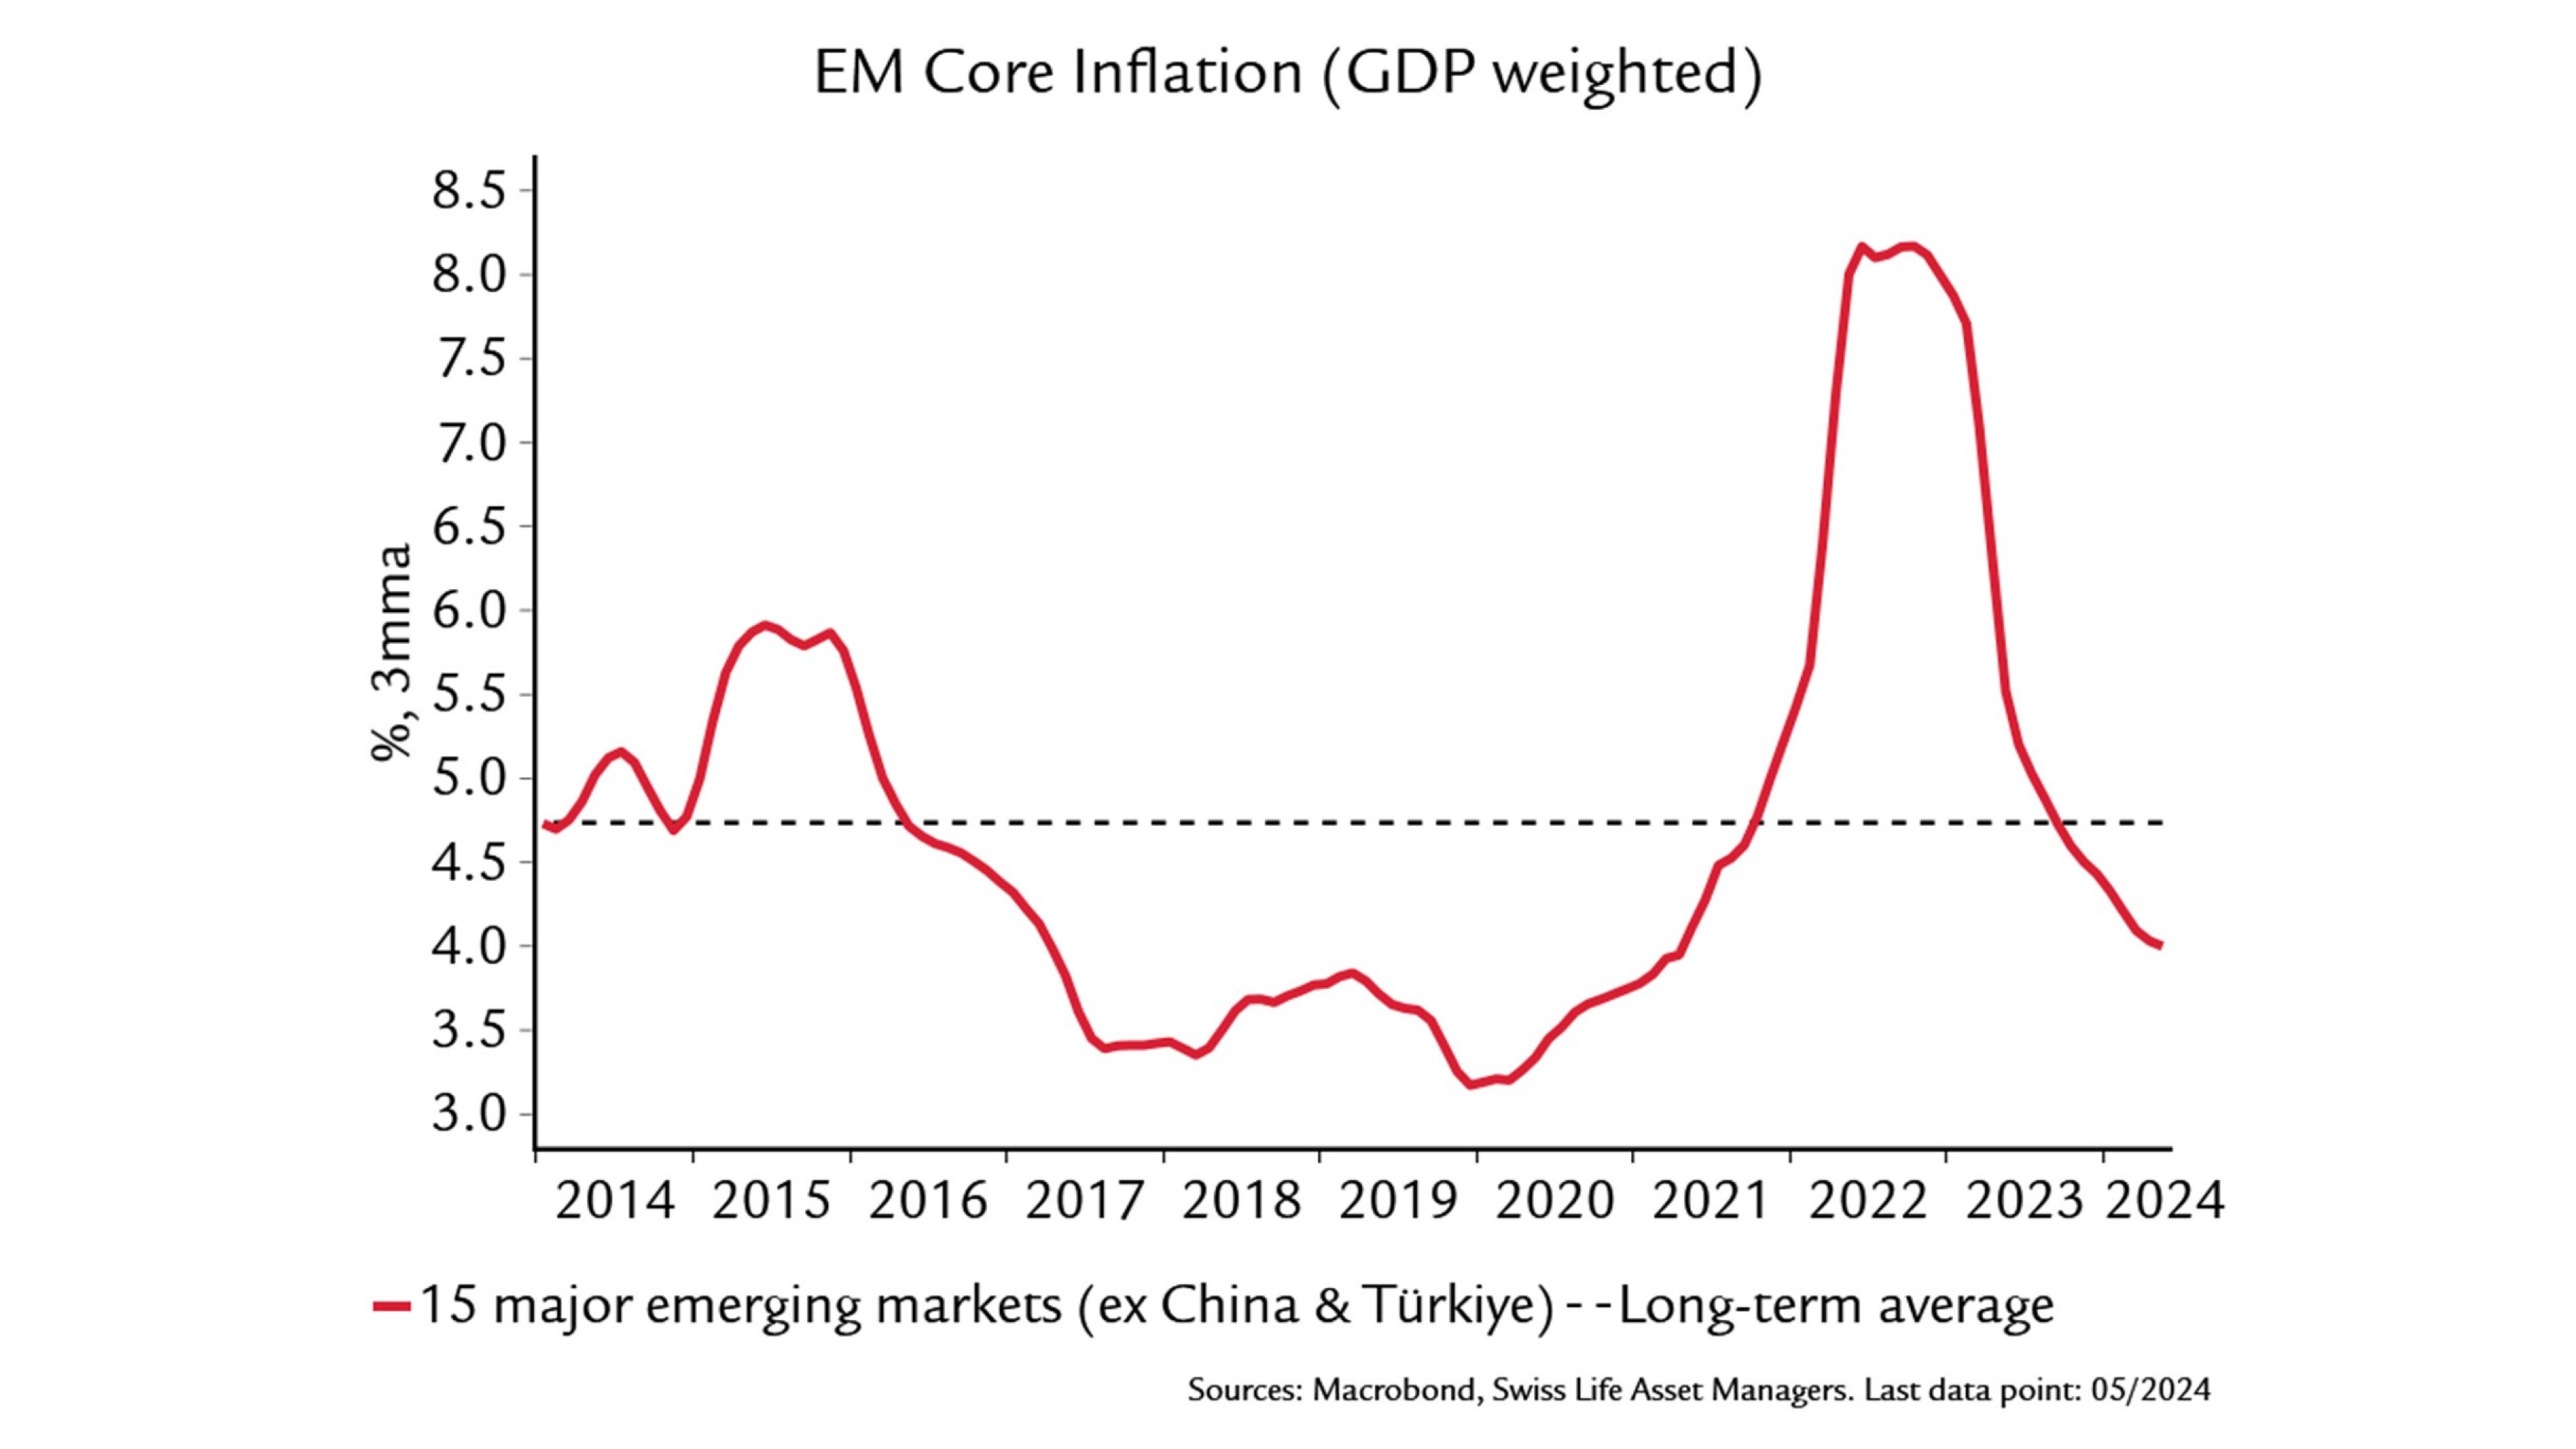 Graphic shows EM Core Inflation